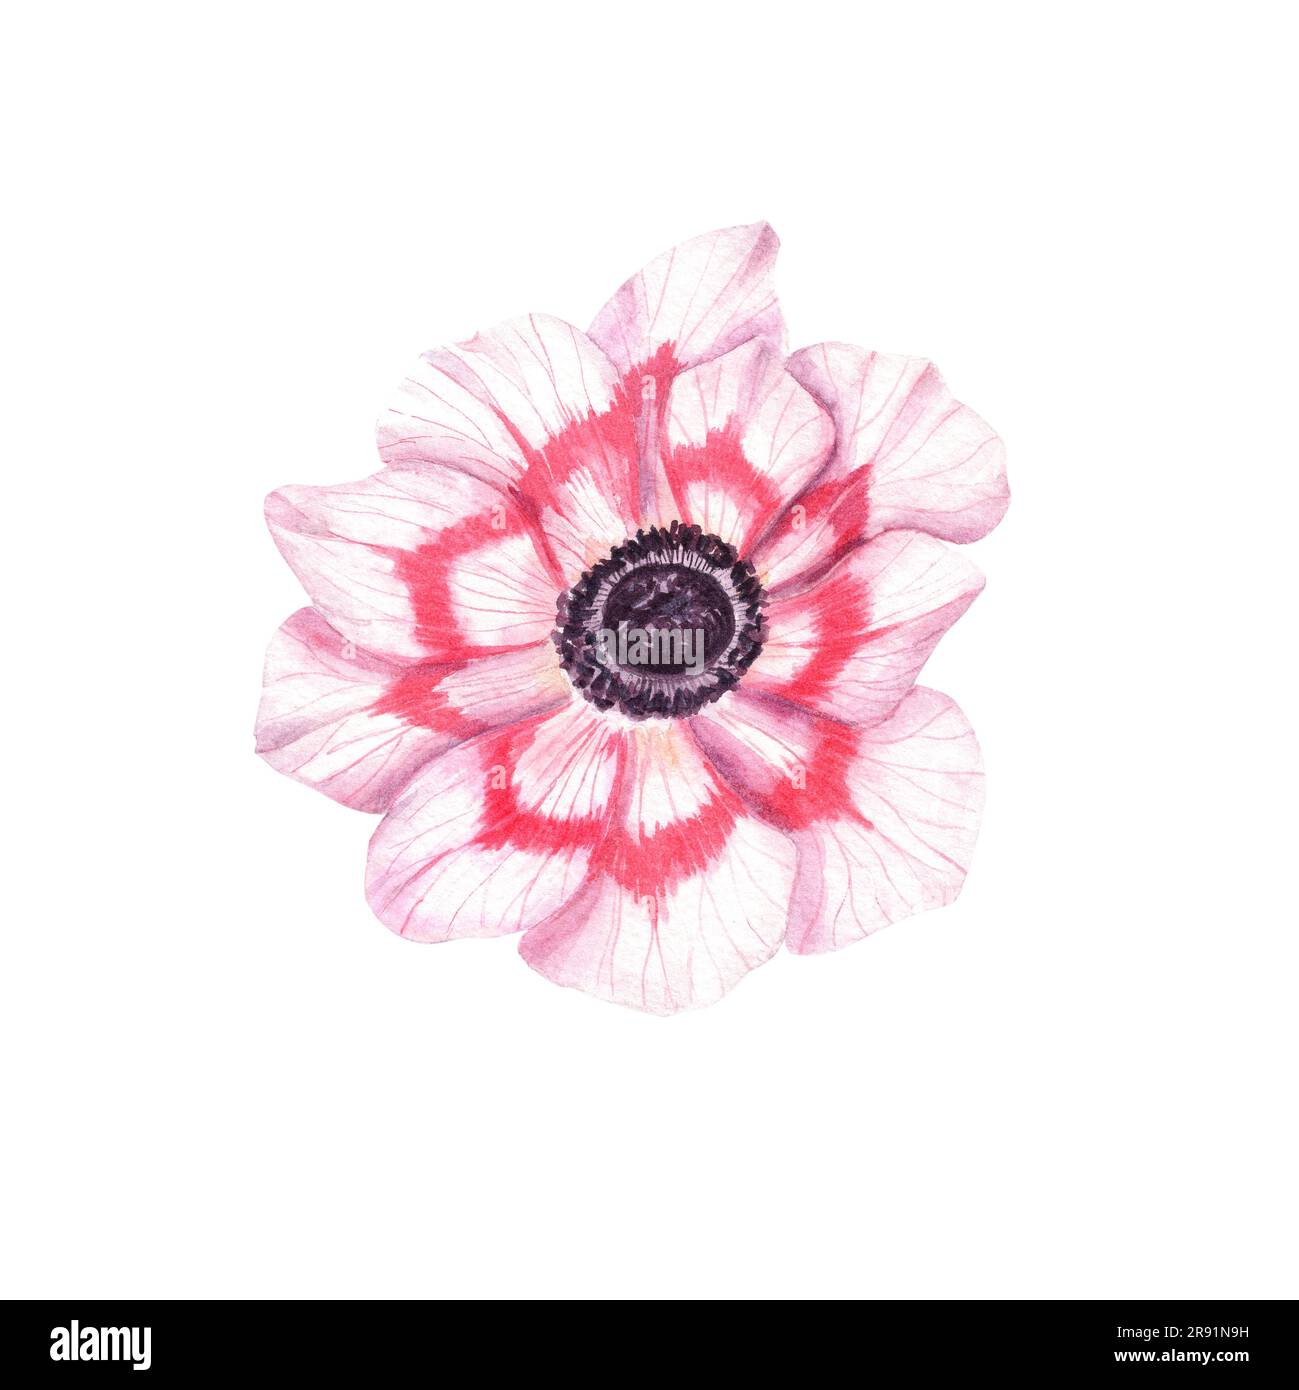 Spring pink anemone isolated on white background. Watercolor illustration for design cards of Valentines day, birthday, mothers day, wedding Stock Photo